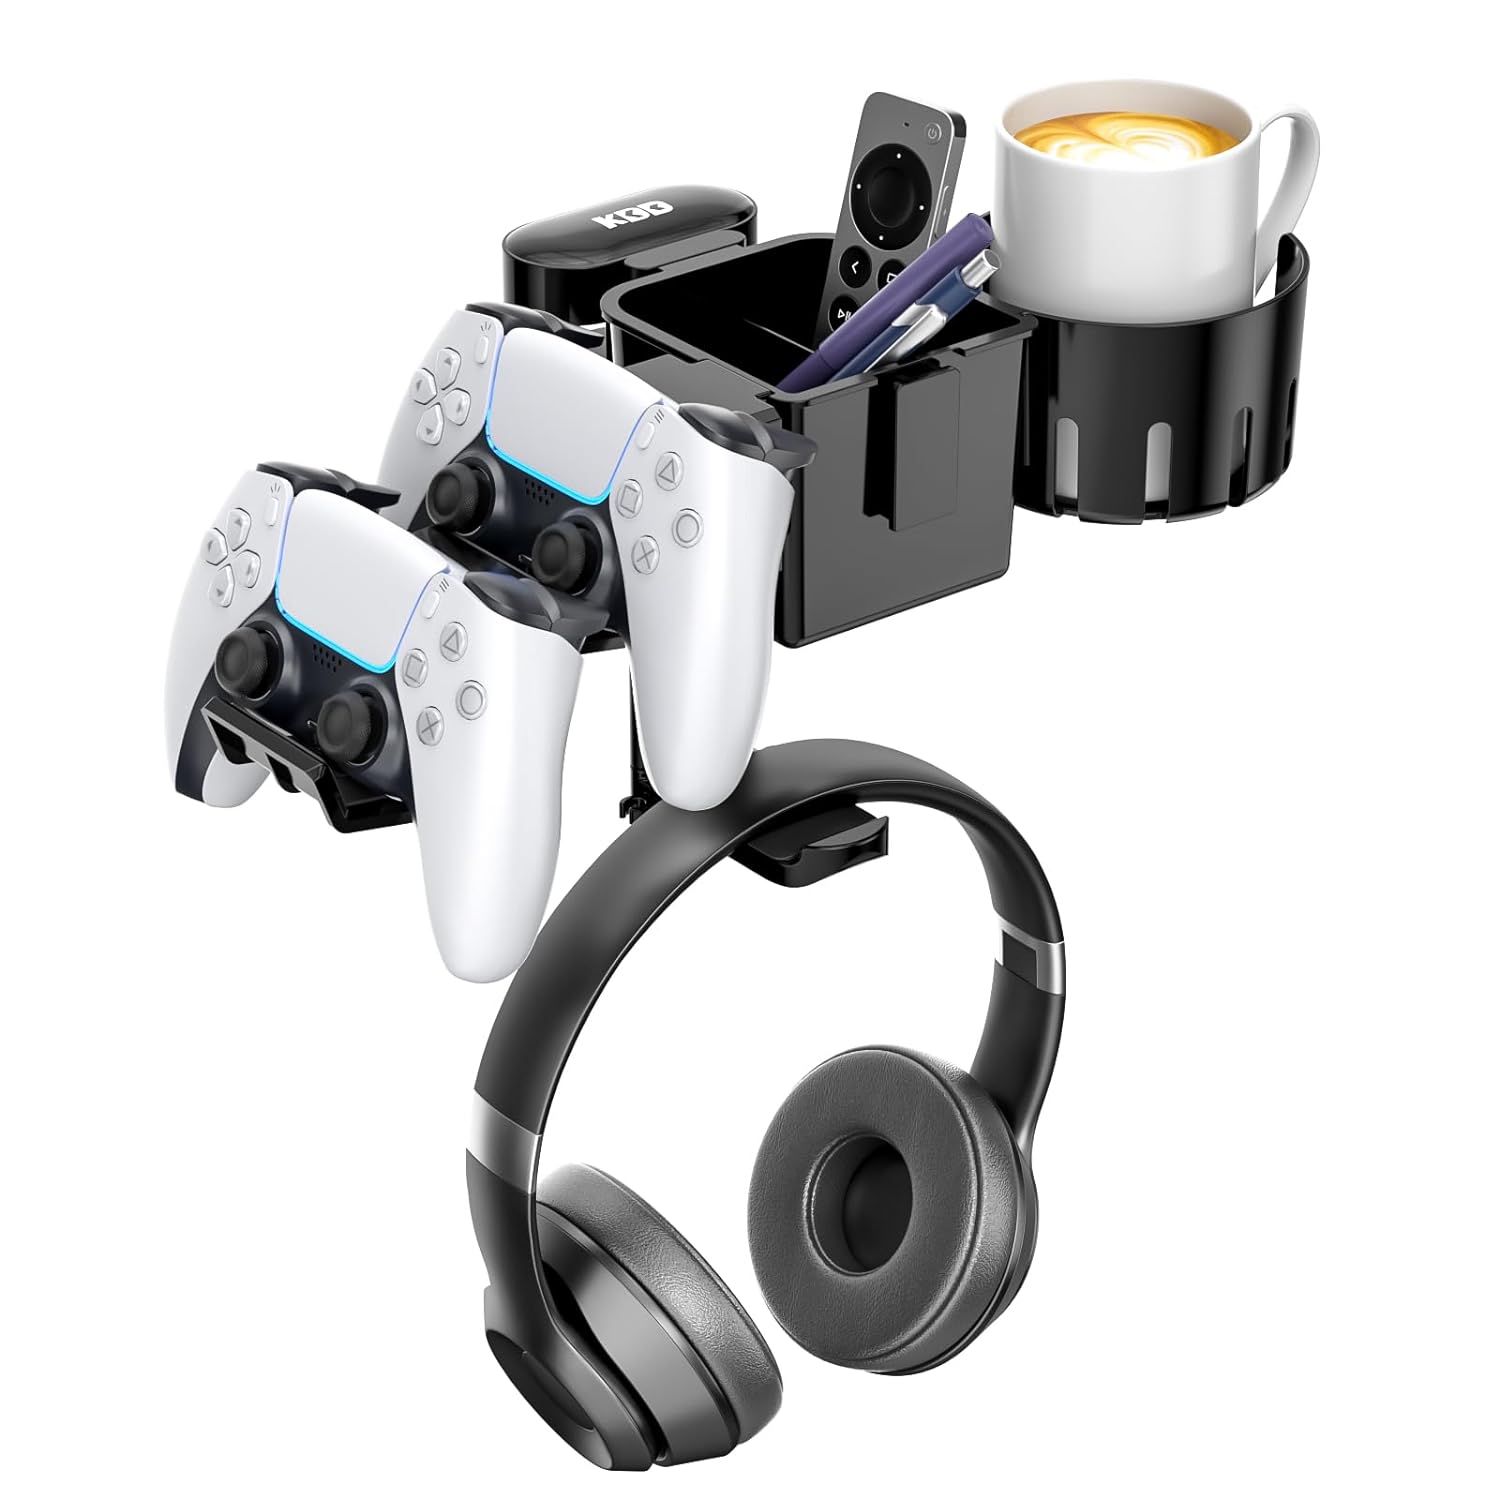 Rotating Headphone Hanger with Cup Holder, 5 in 1 Clamp On Desk Organizer (Black)